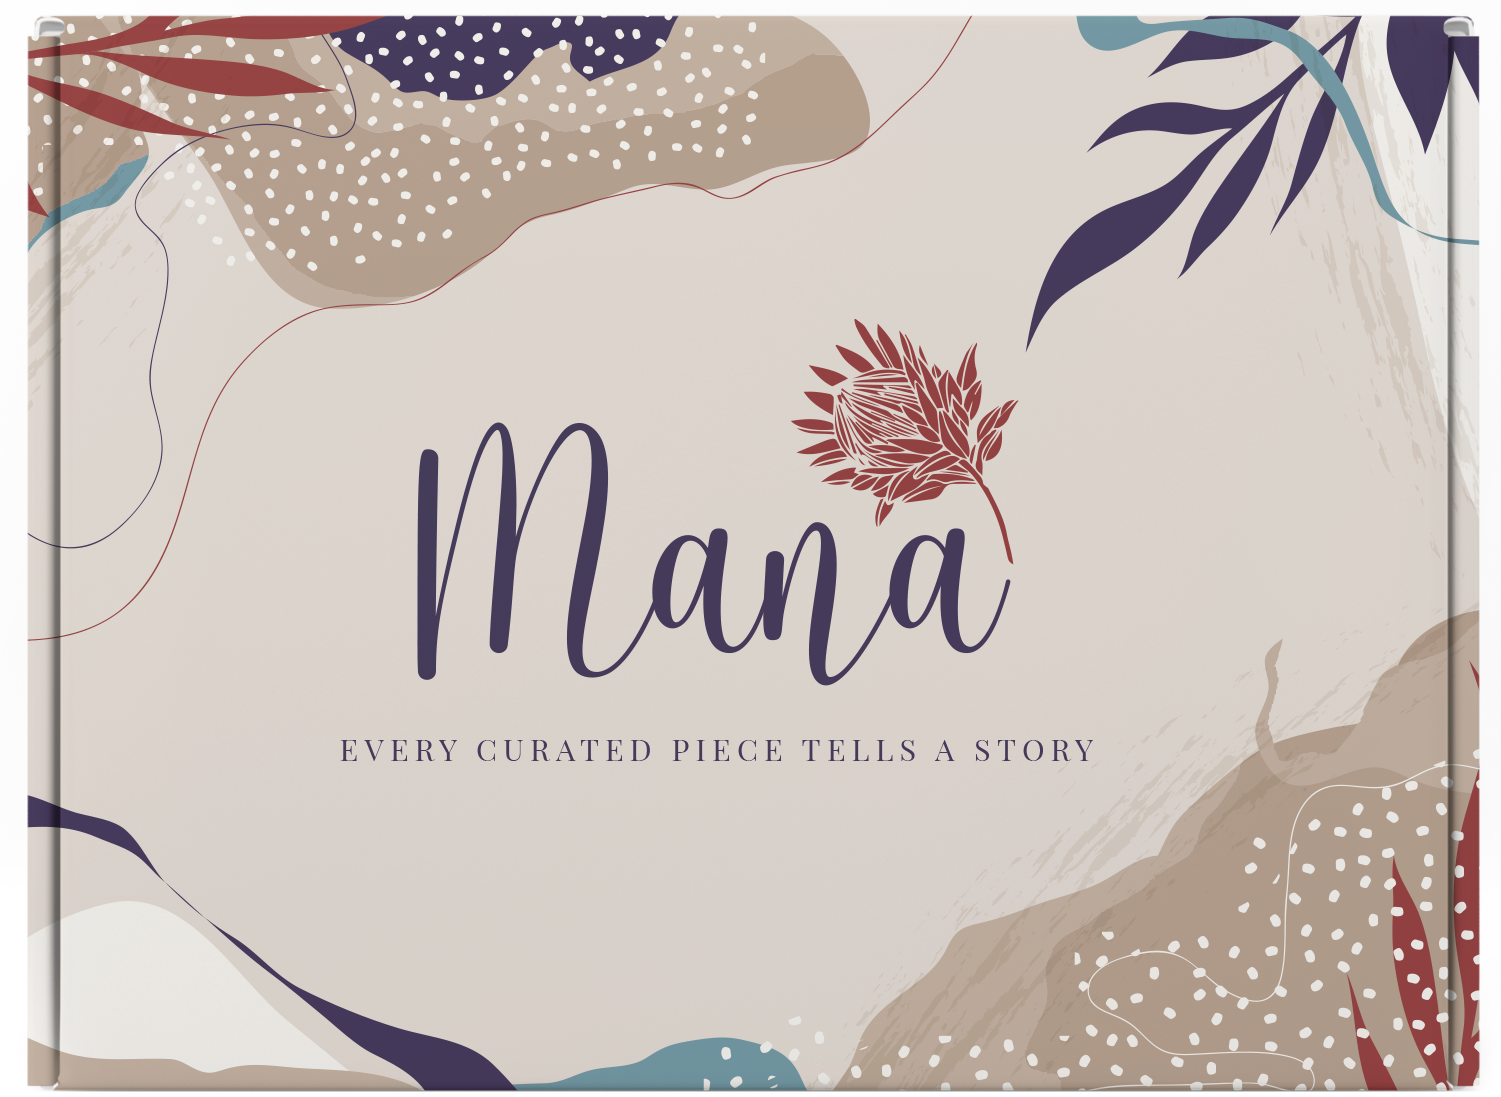 The Mana subscription box features bright colors and says, "Every Curated Piece Tells a Story."